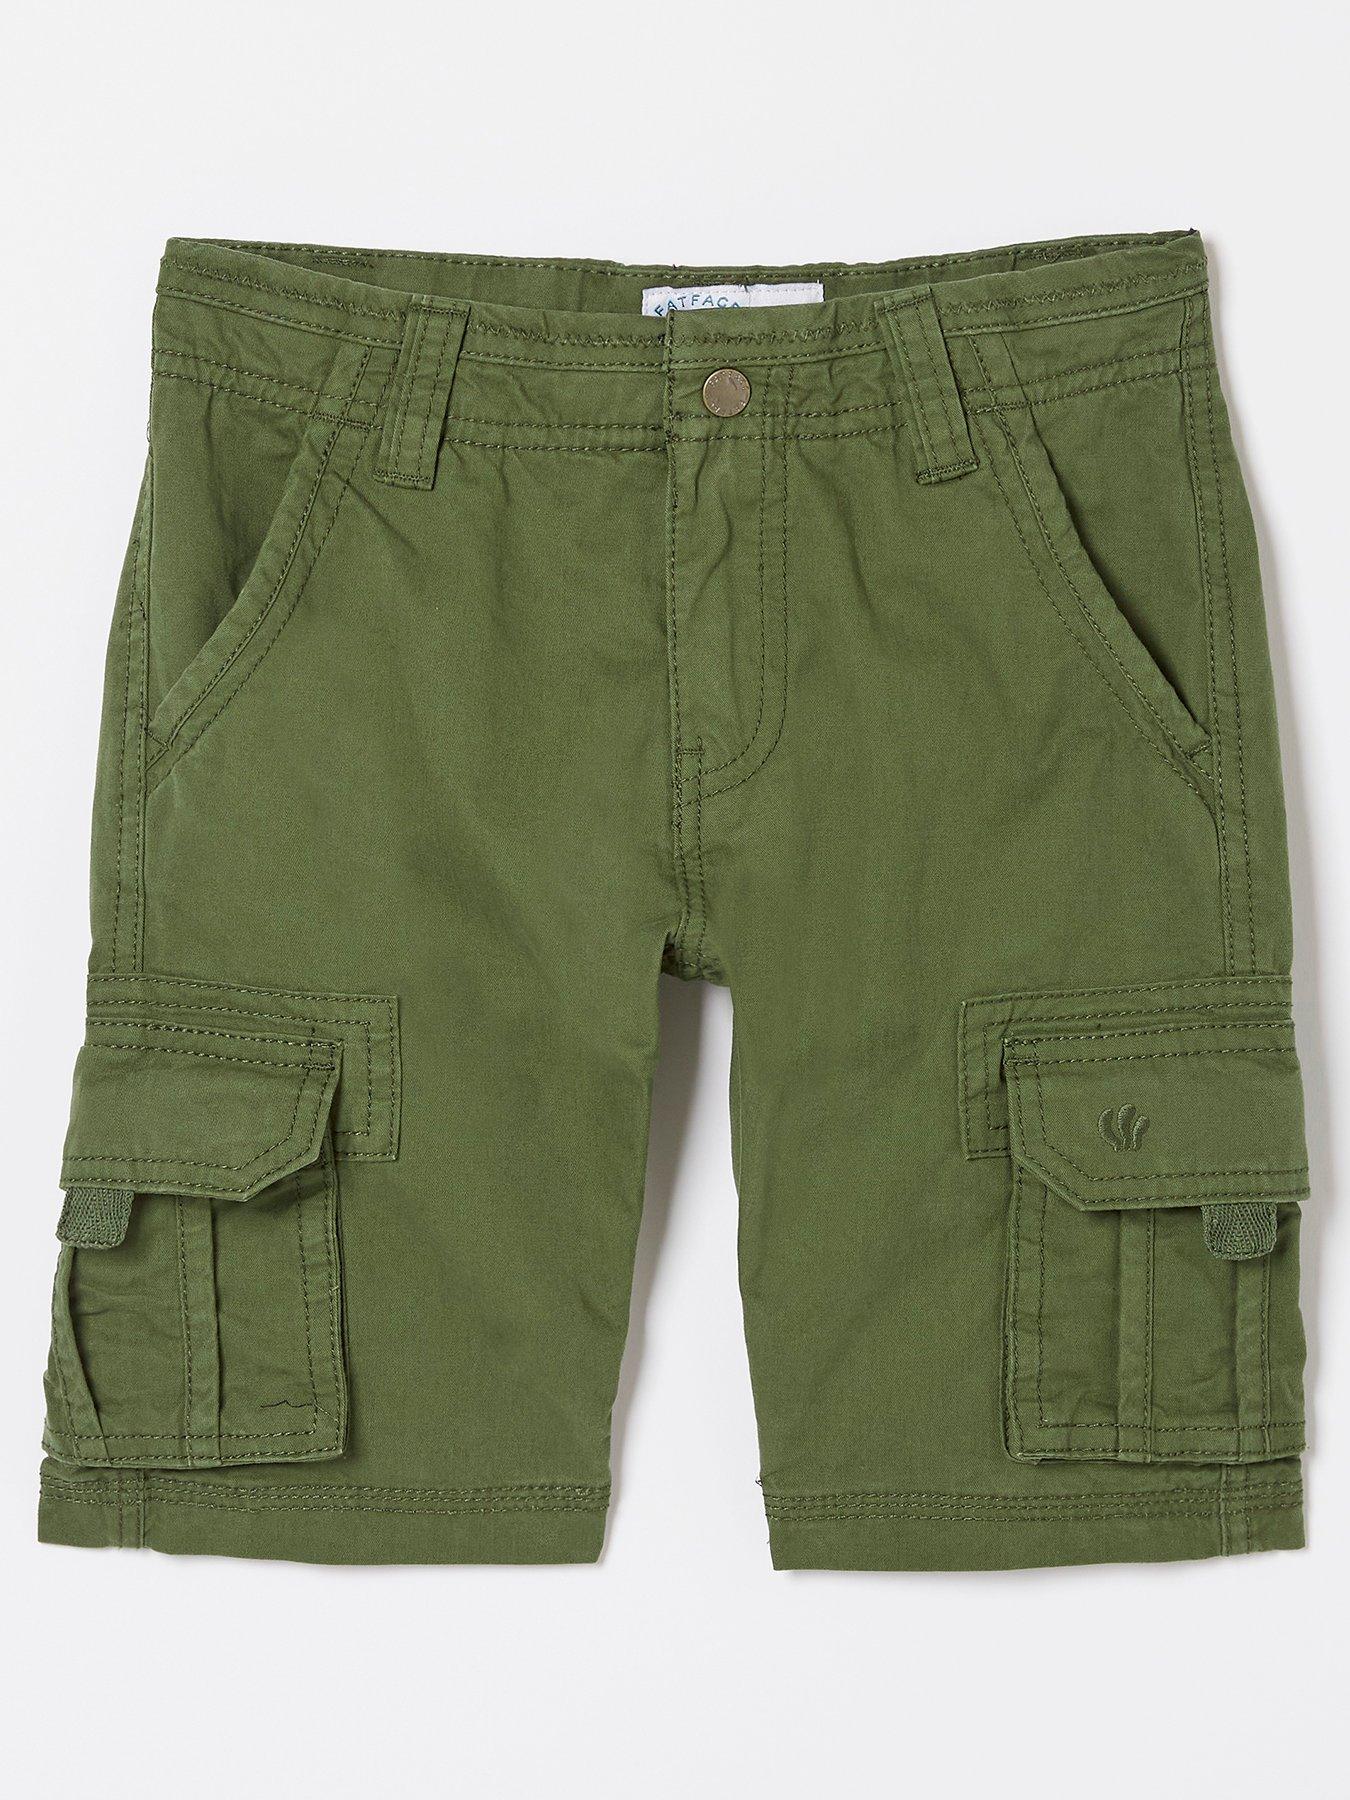 Janie and Jack Cargo Shorts Size 3T: Green Boys Bottoms - 52005503